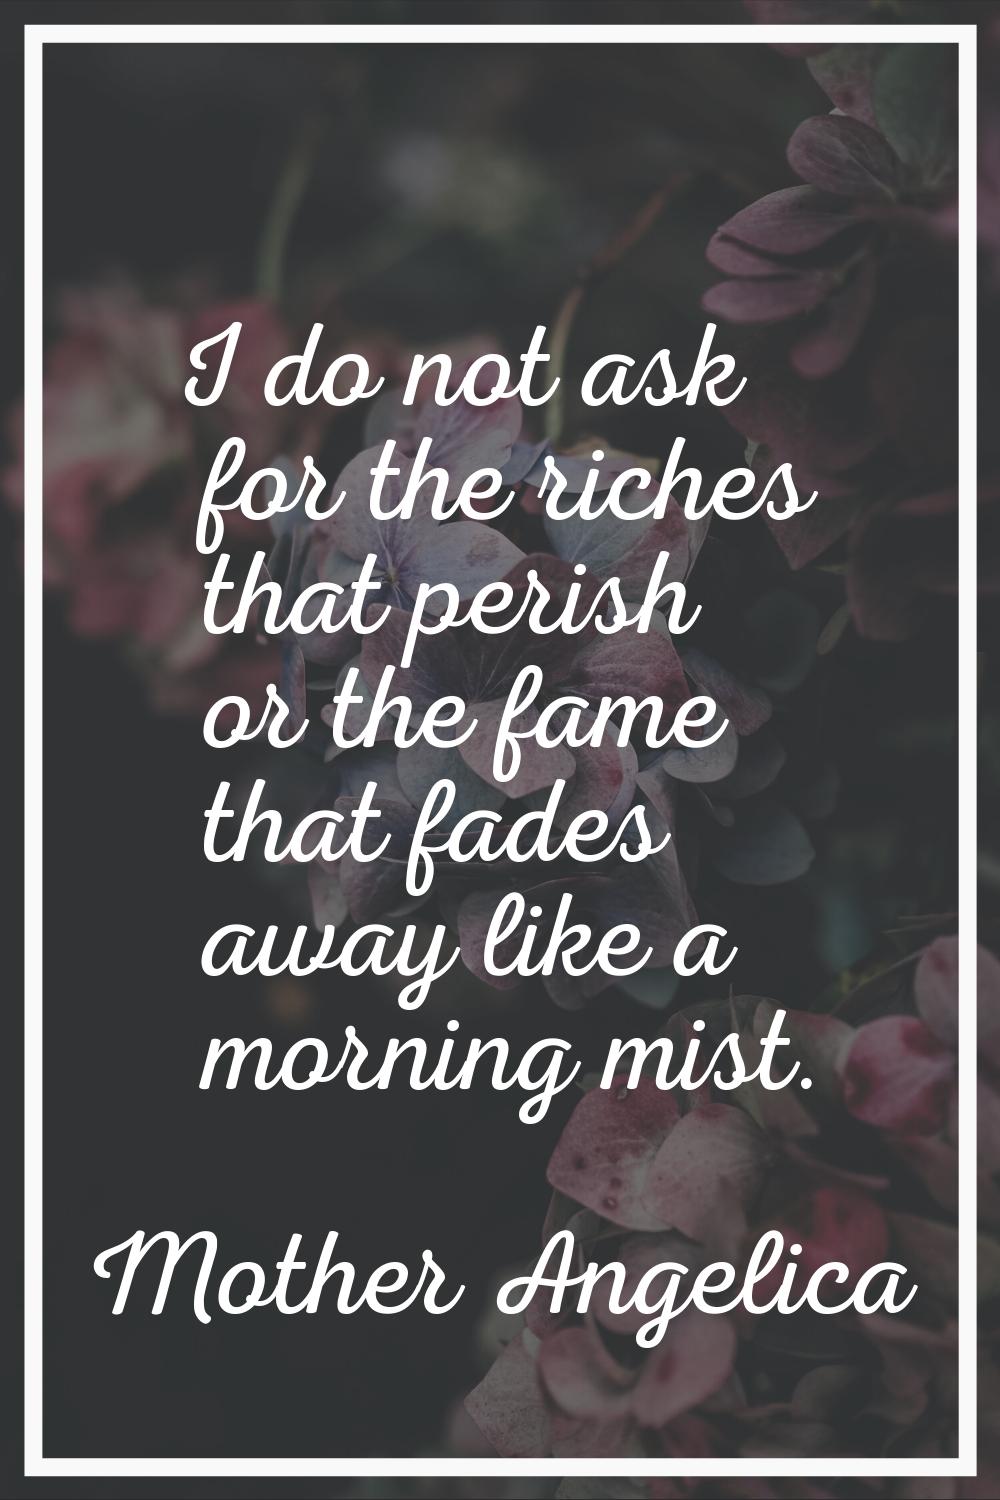 I do not ask for the riches that perish or the fame that fades away like a morning mist.